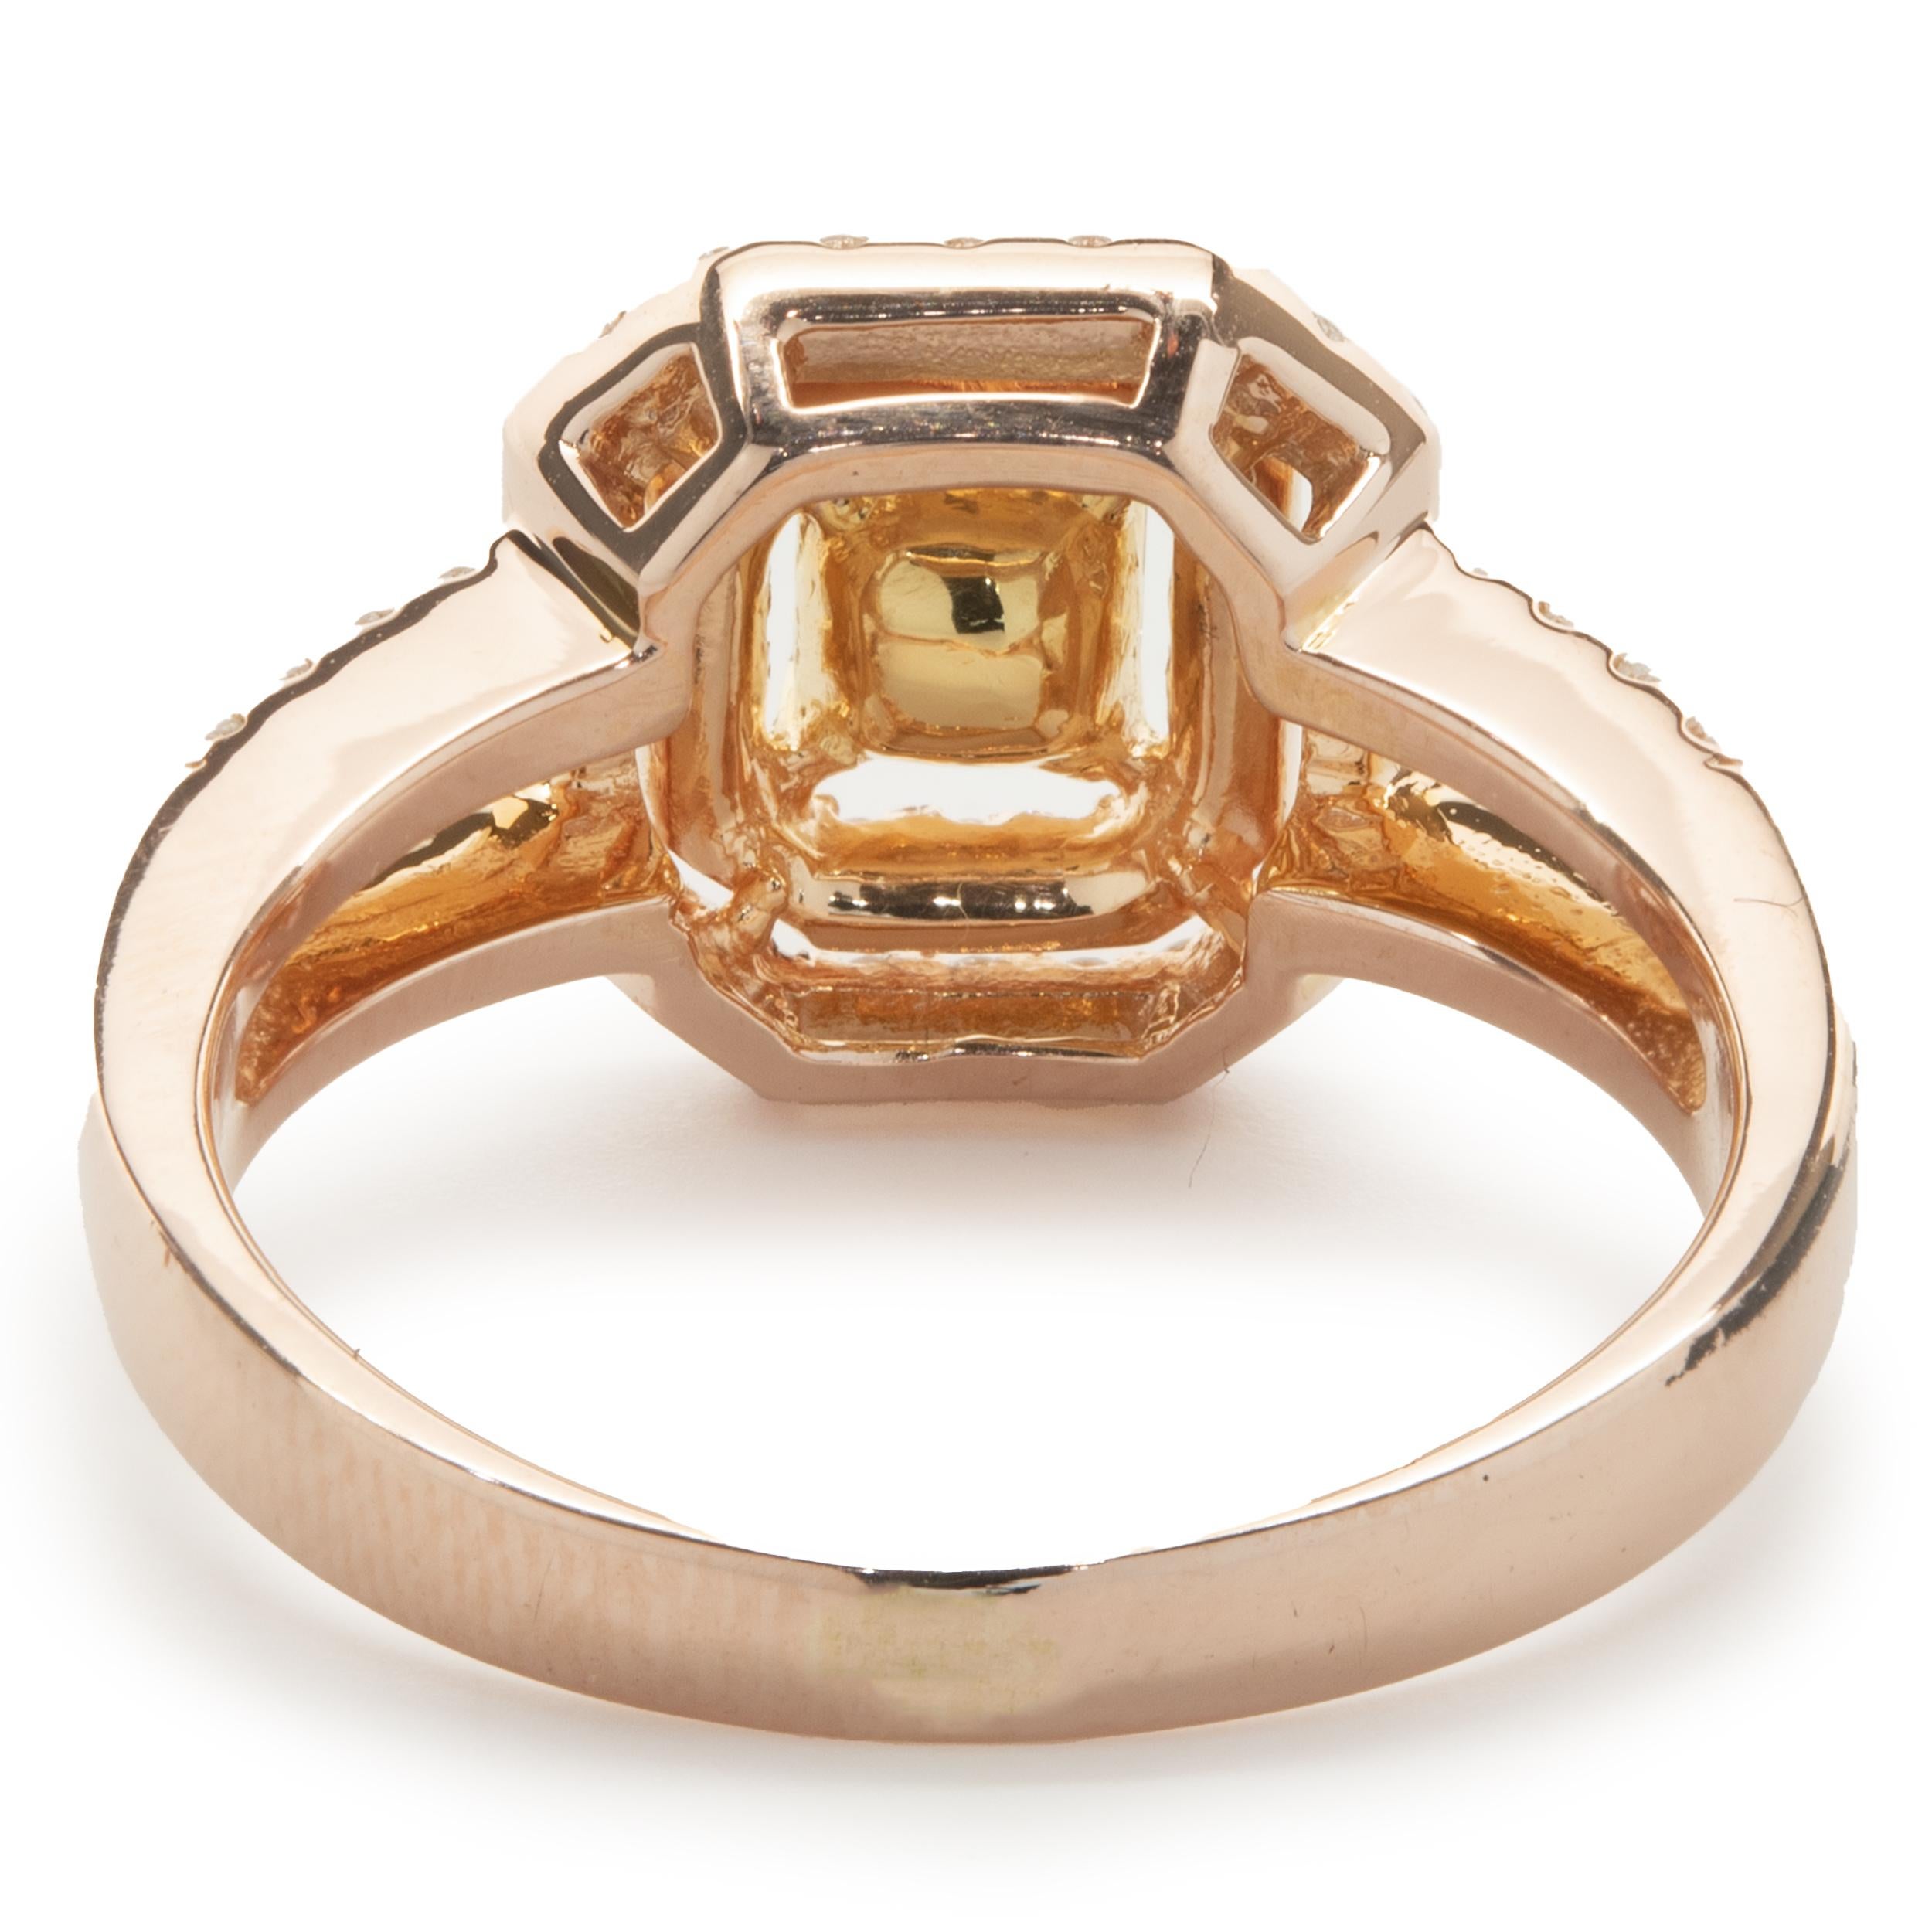 Princess Cut 18 Karat Rose Gold Fancy Yellow and White Diamond Engagement Ring For Sale